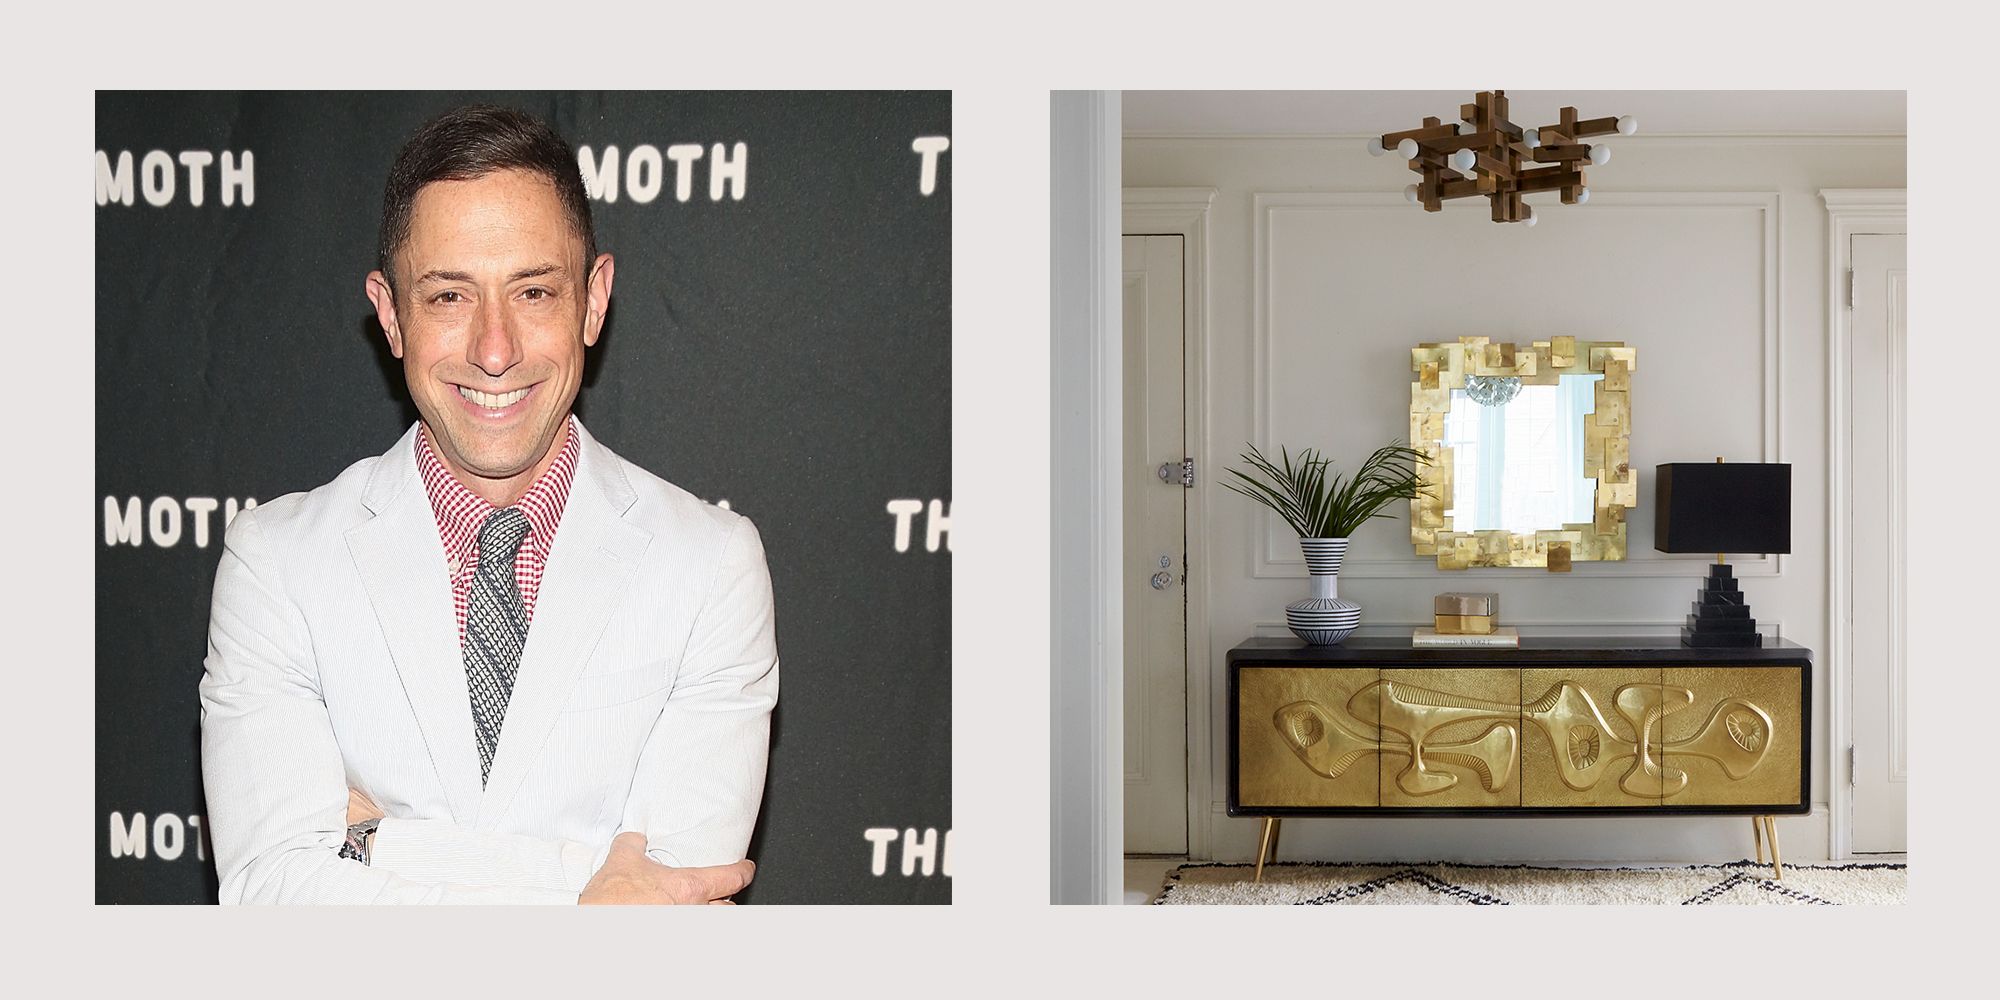 2019 S Hottest Home Trends According To Jonathan Adler